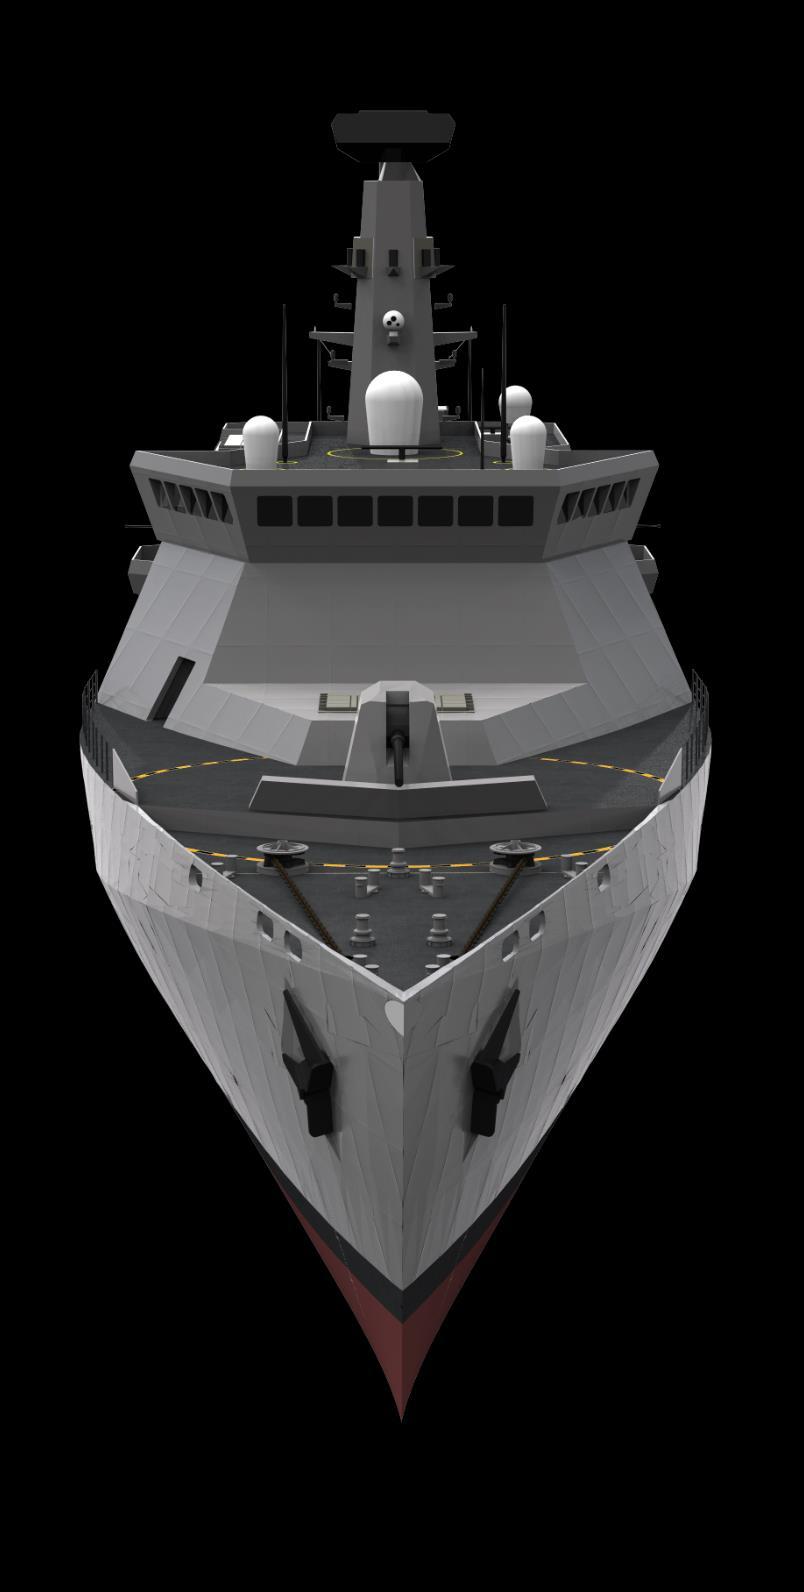 Designed for the Royal Navy and export markets Steller Systems has worked closely with both the Royal Navy and export customers to define the range of roles and high-level requirements for a light